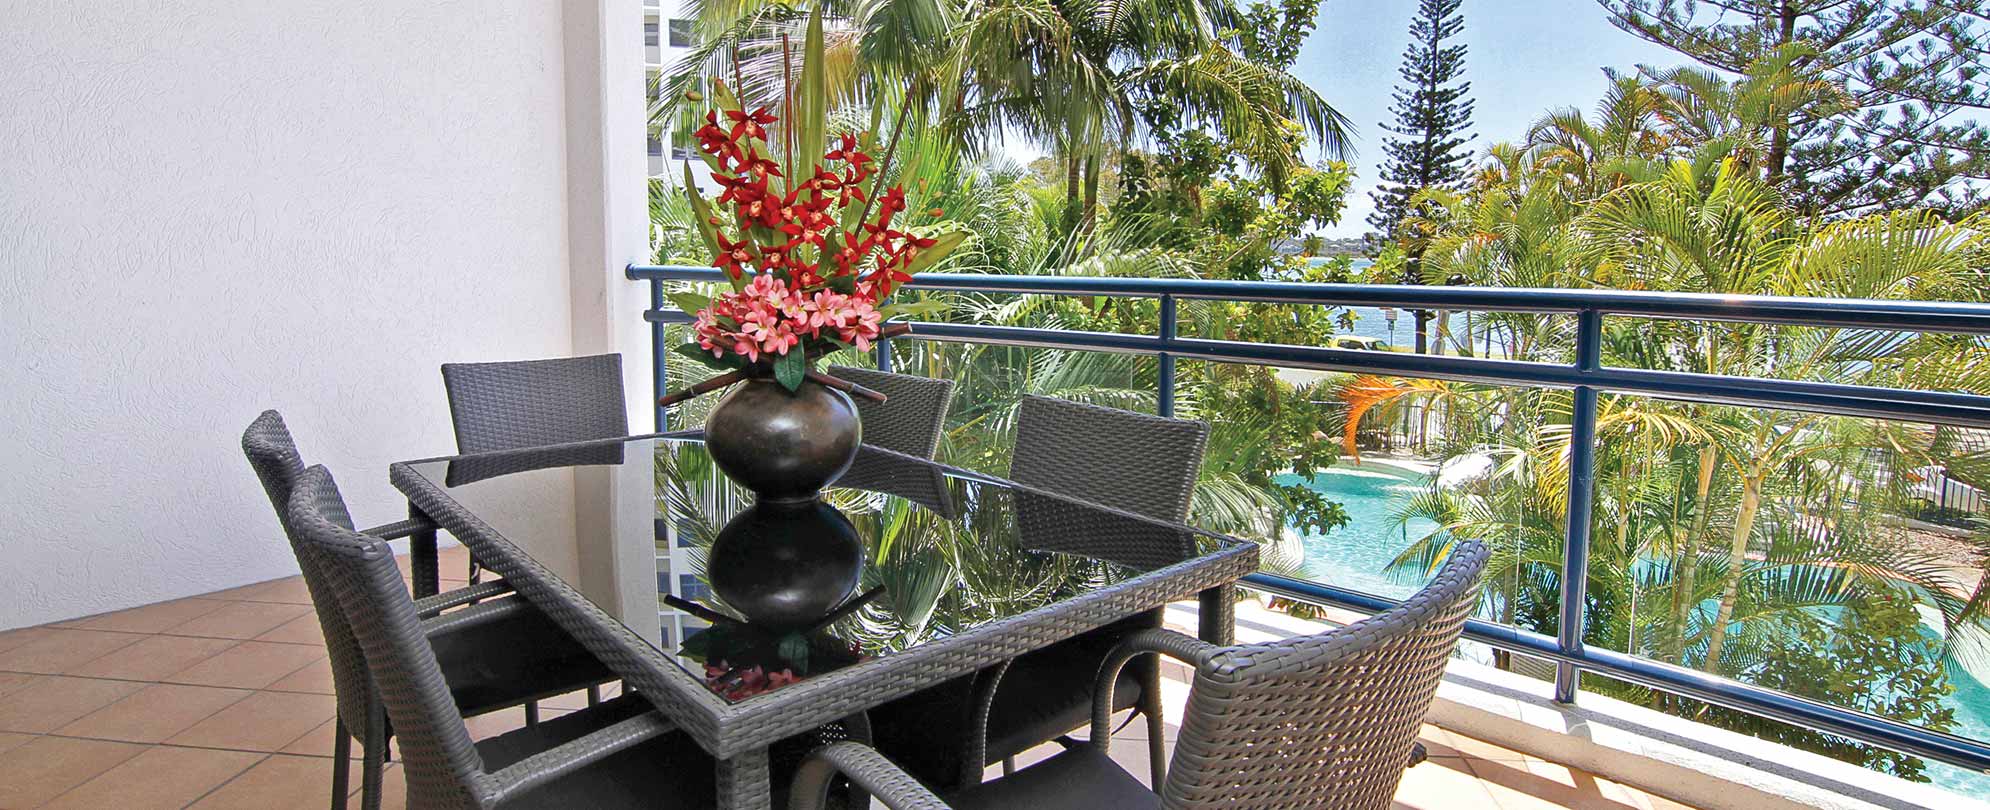 A table with chairs on the balcony of a 1-bedroom suite at Club Wyndham Golden Beach.